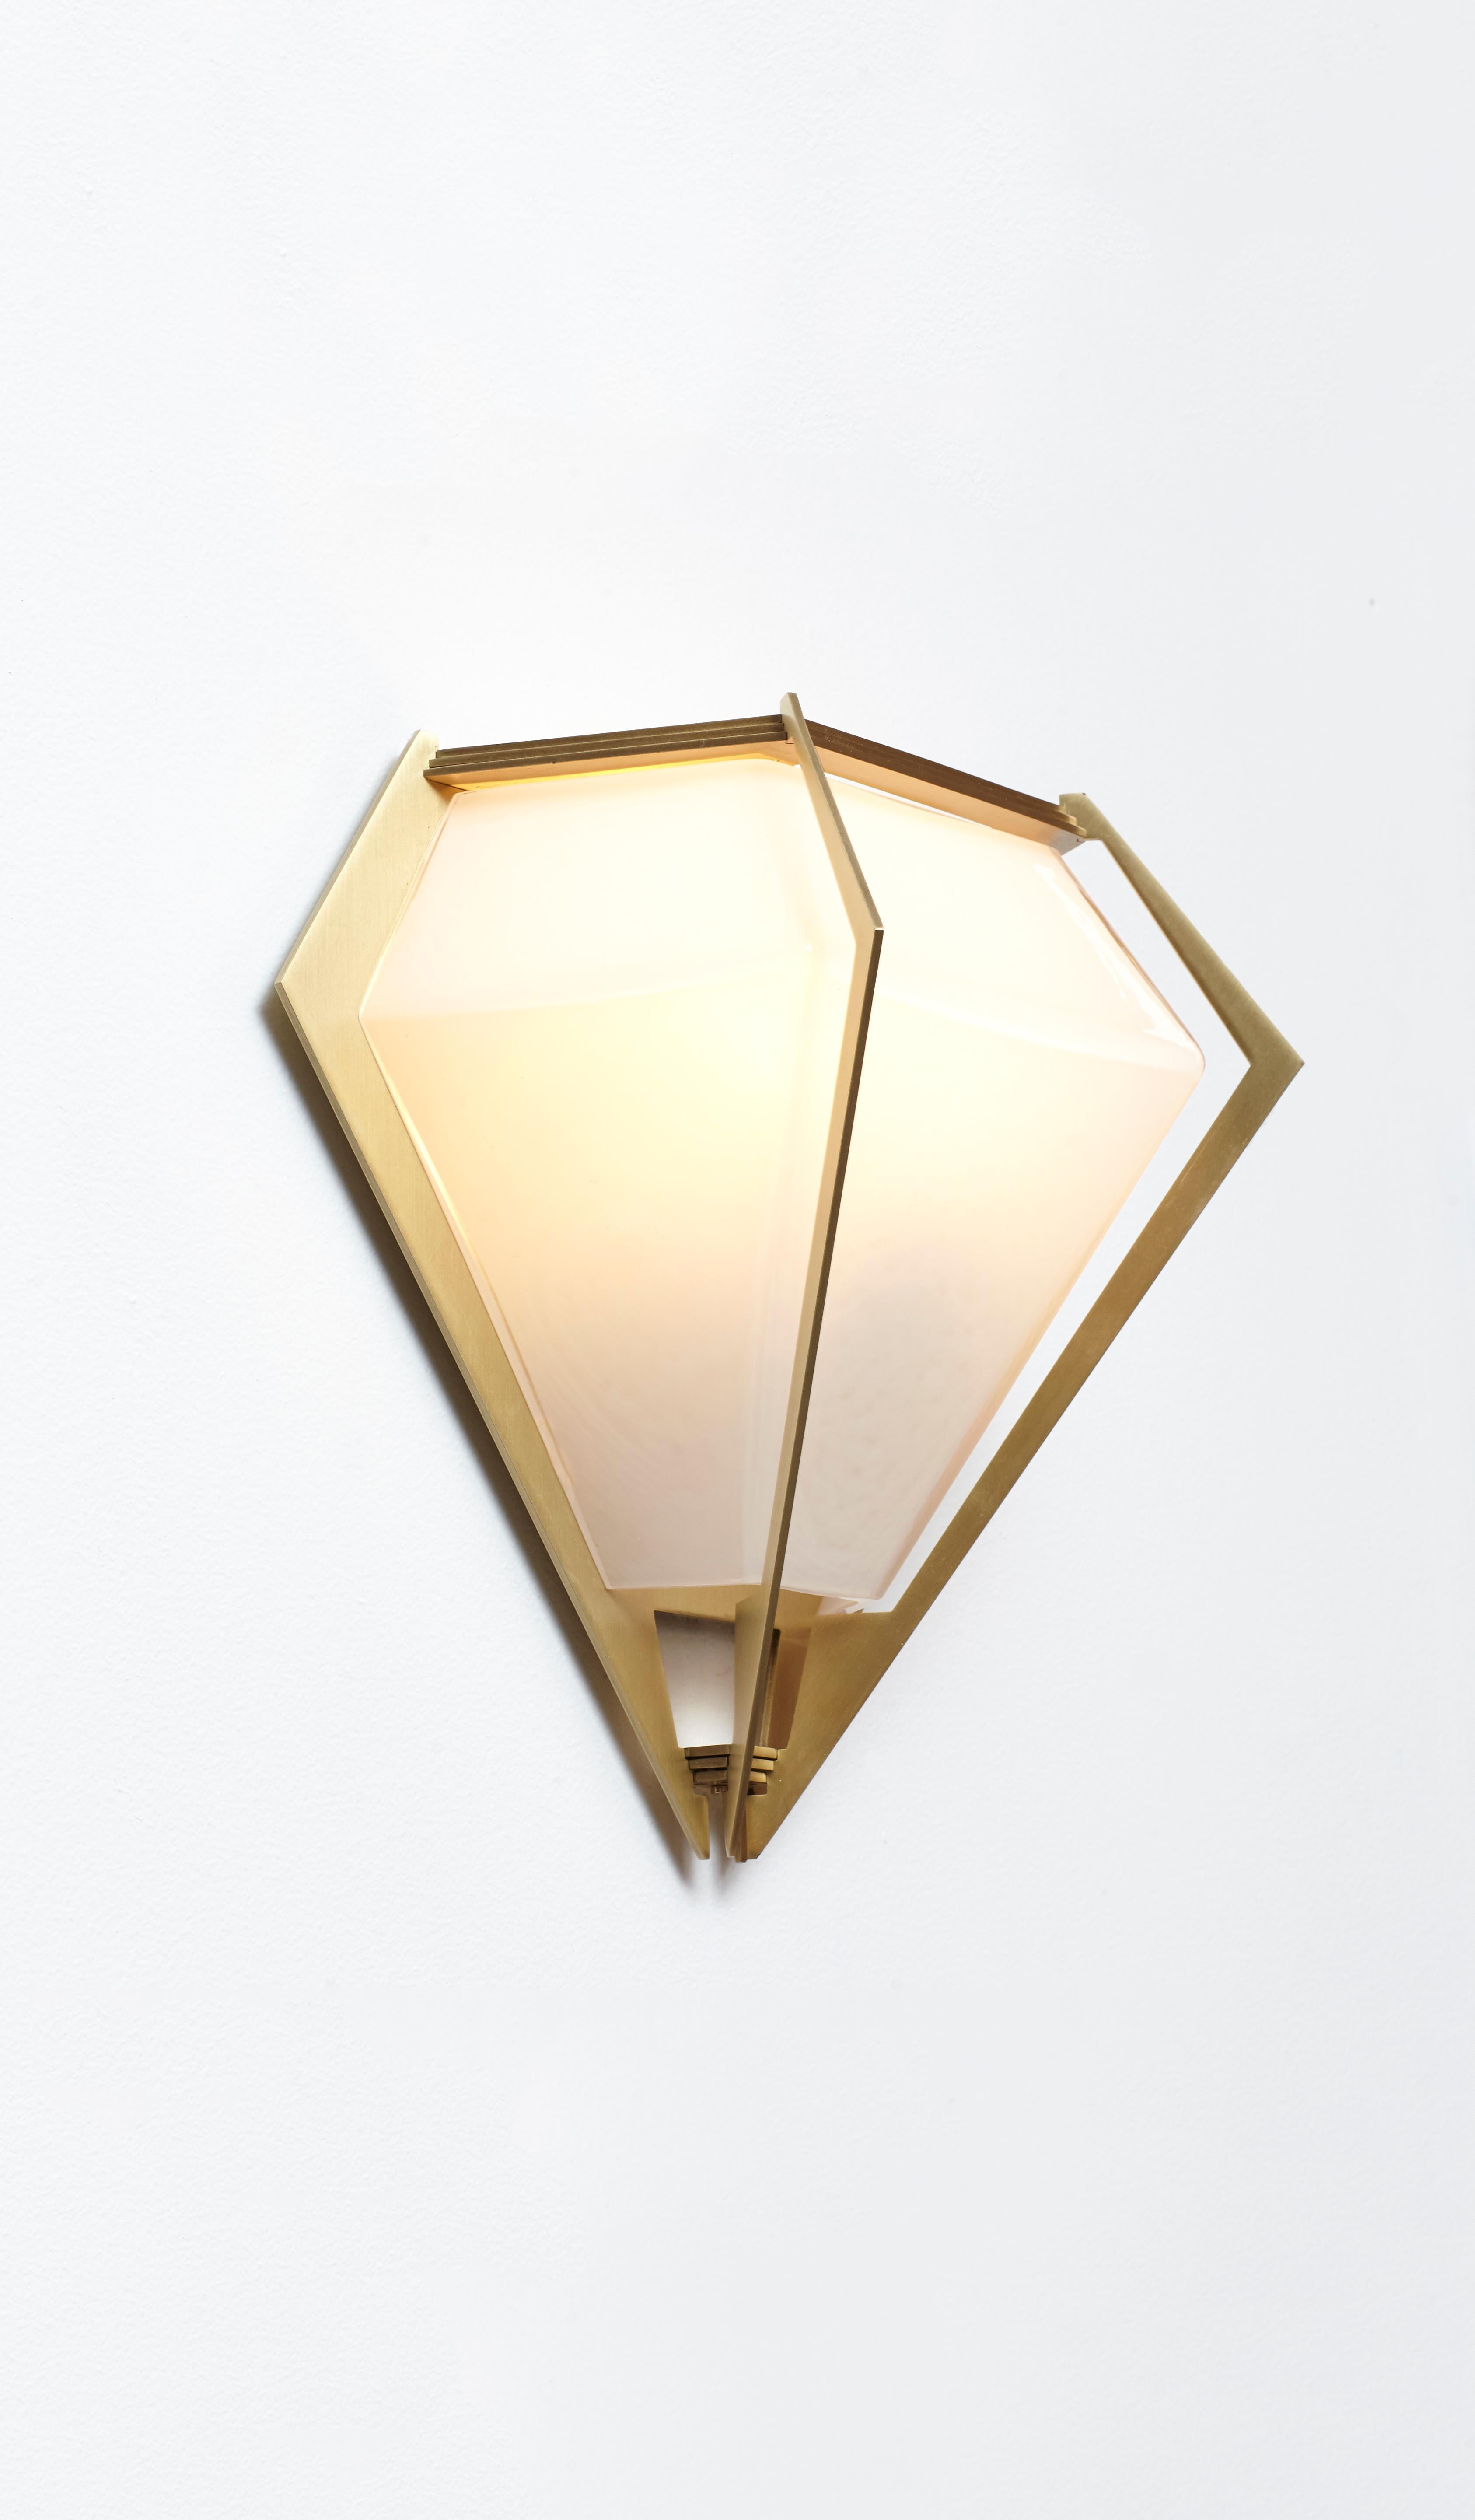 Canadian Harlow Wall Sconce in Satin Brass & Alabaster White Glass For Sale